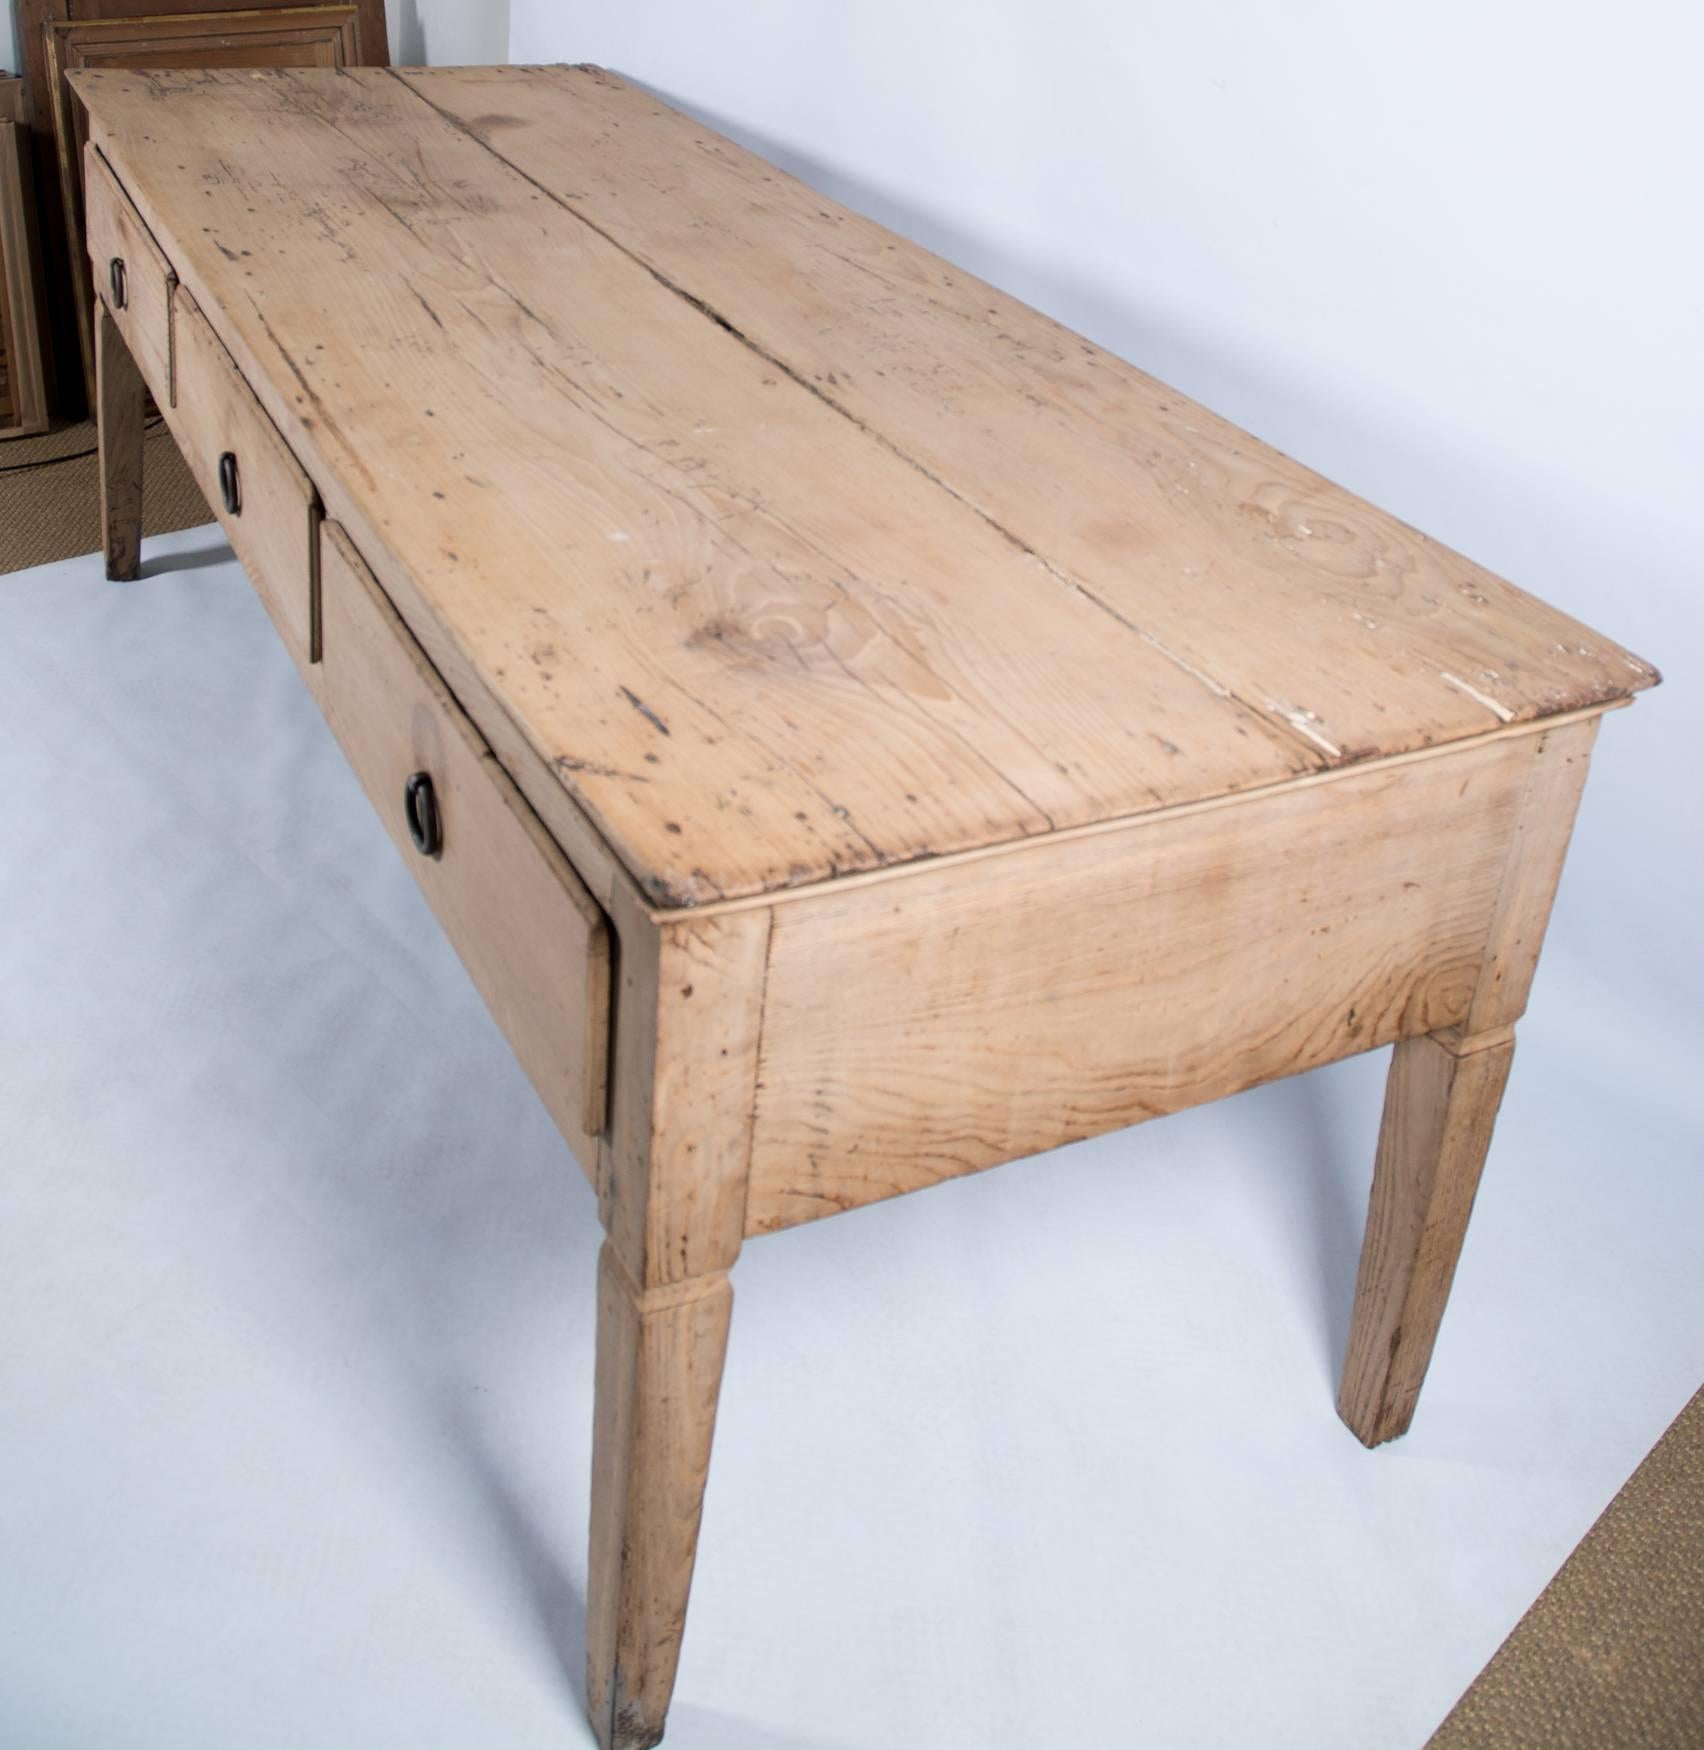 Large chestnut wood table, possibly from Portugal, Mid-18th century.
There are three large drawers to the front with iron handles.